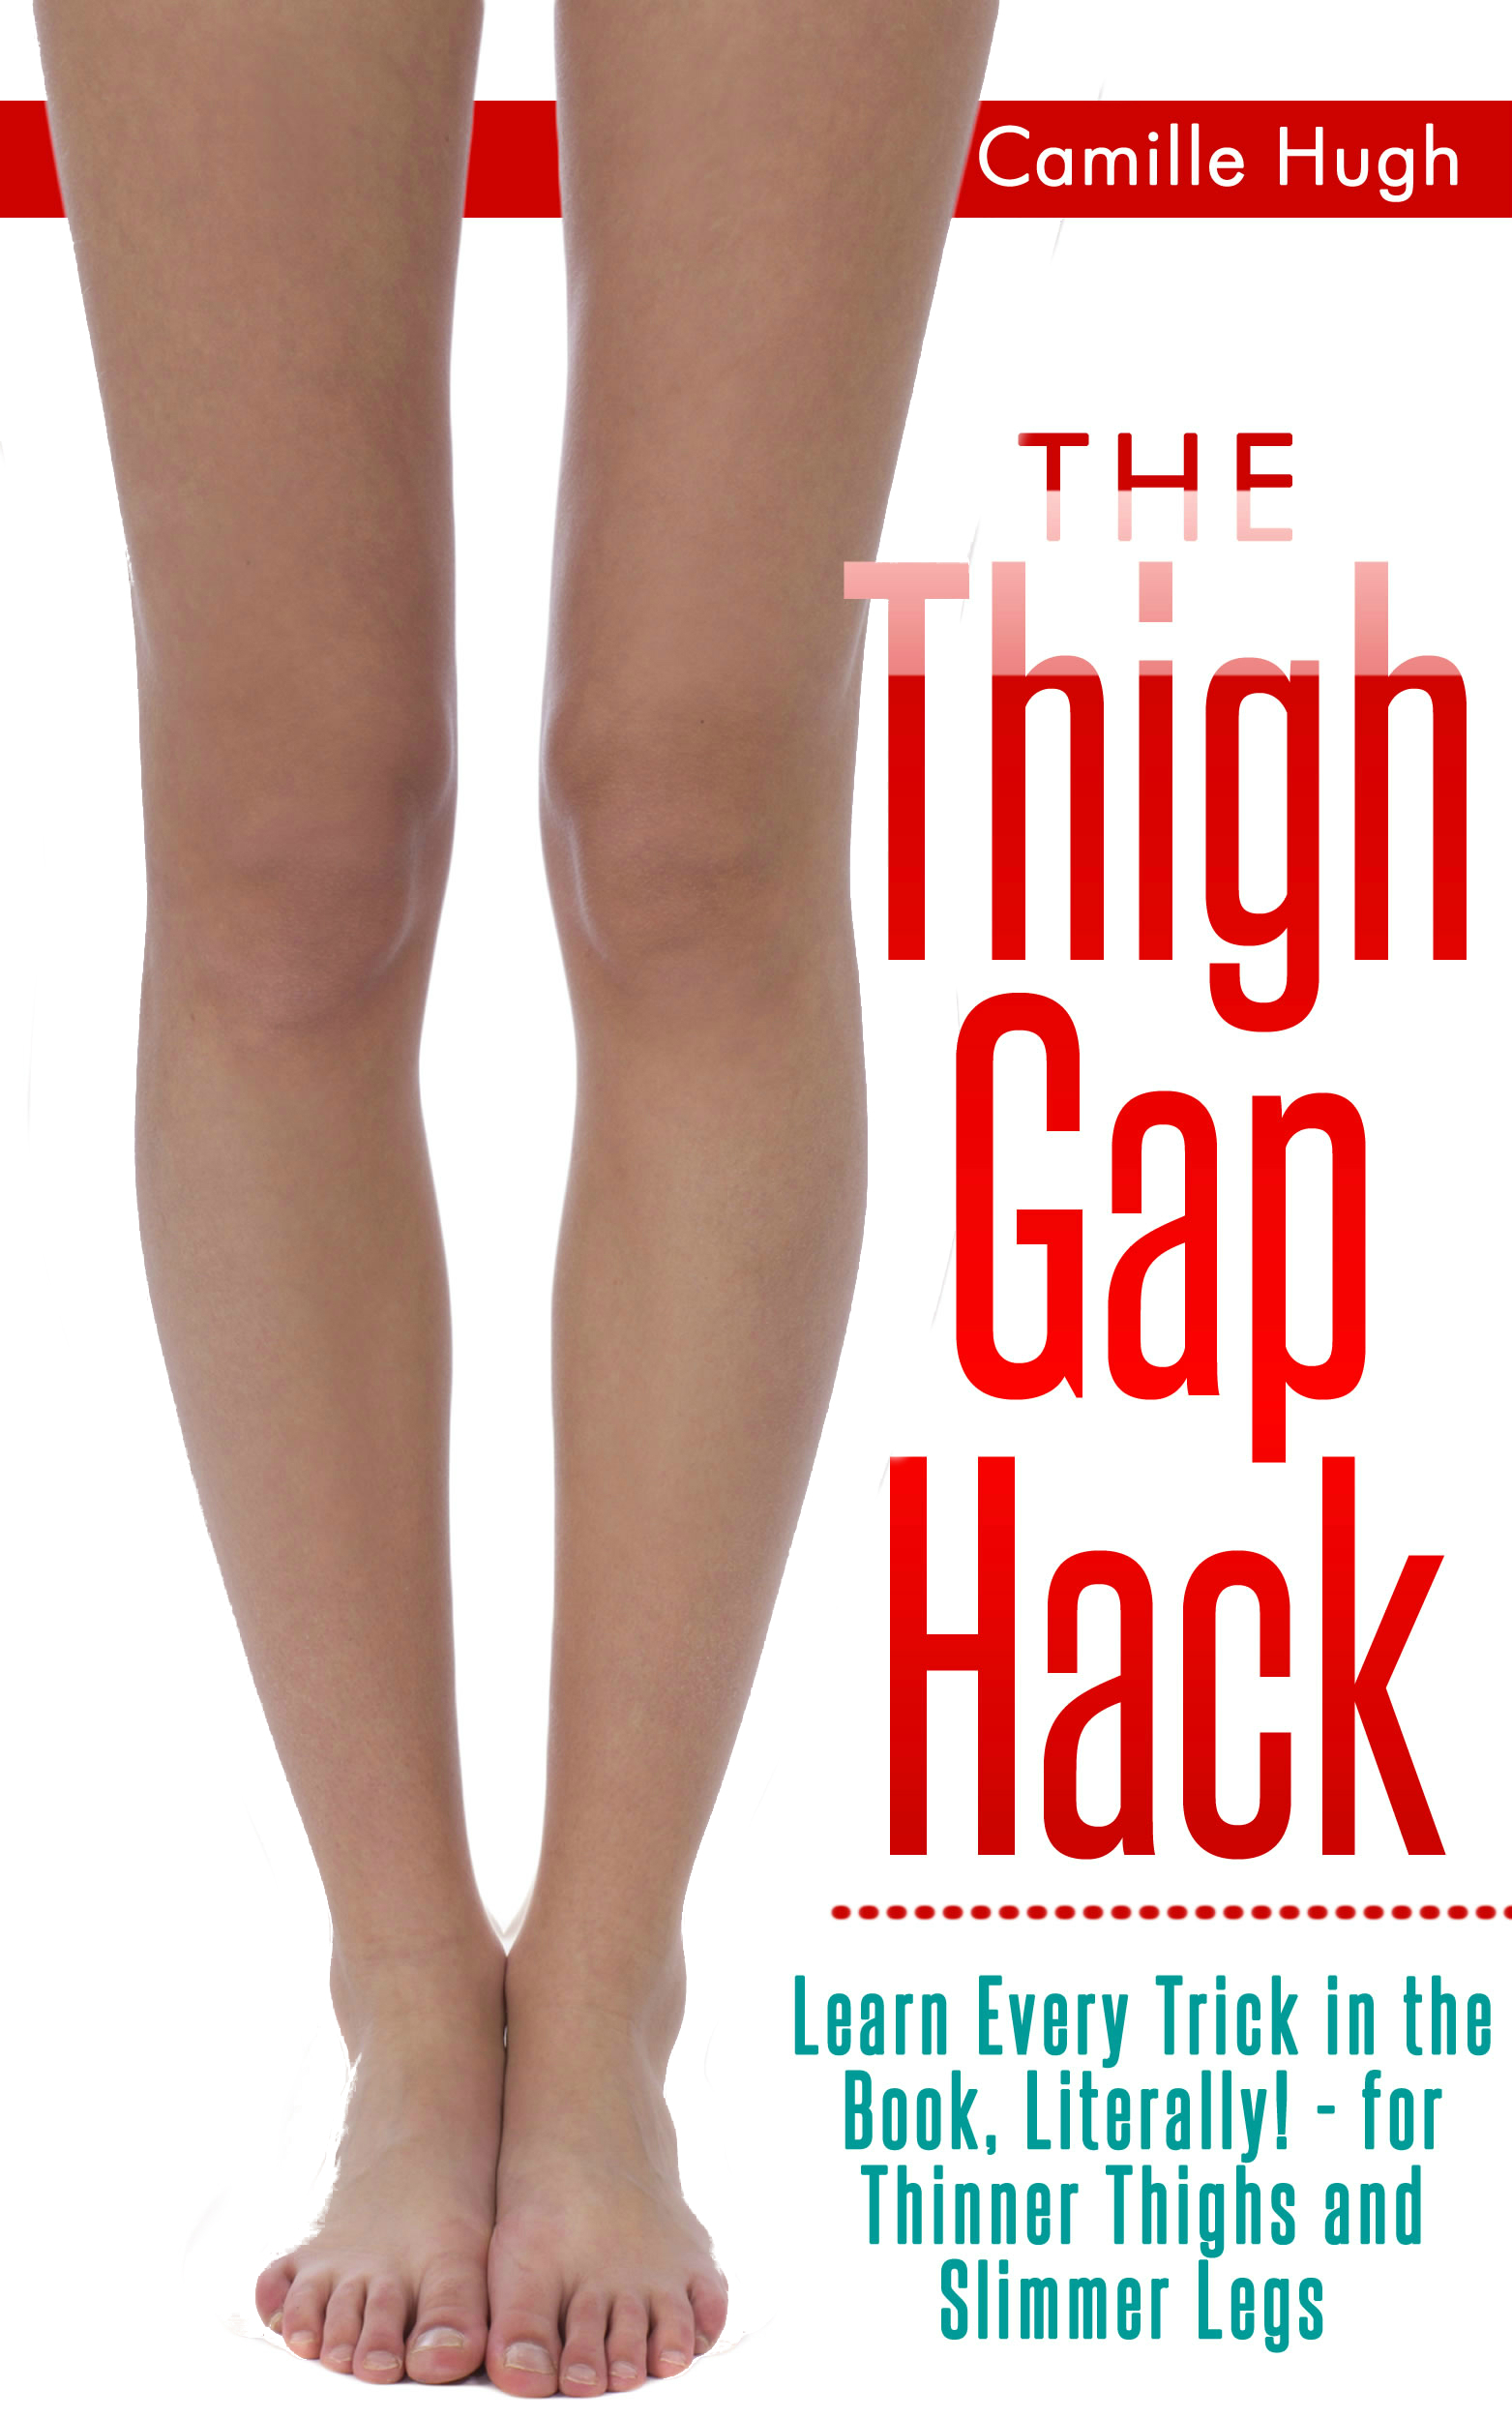 How do you get thin thighs?